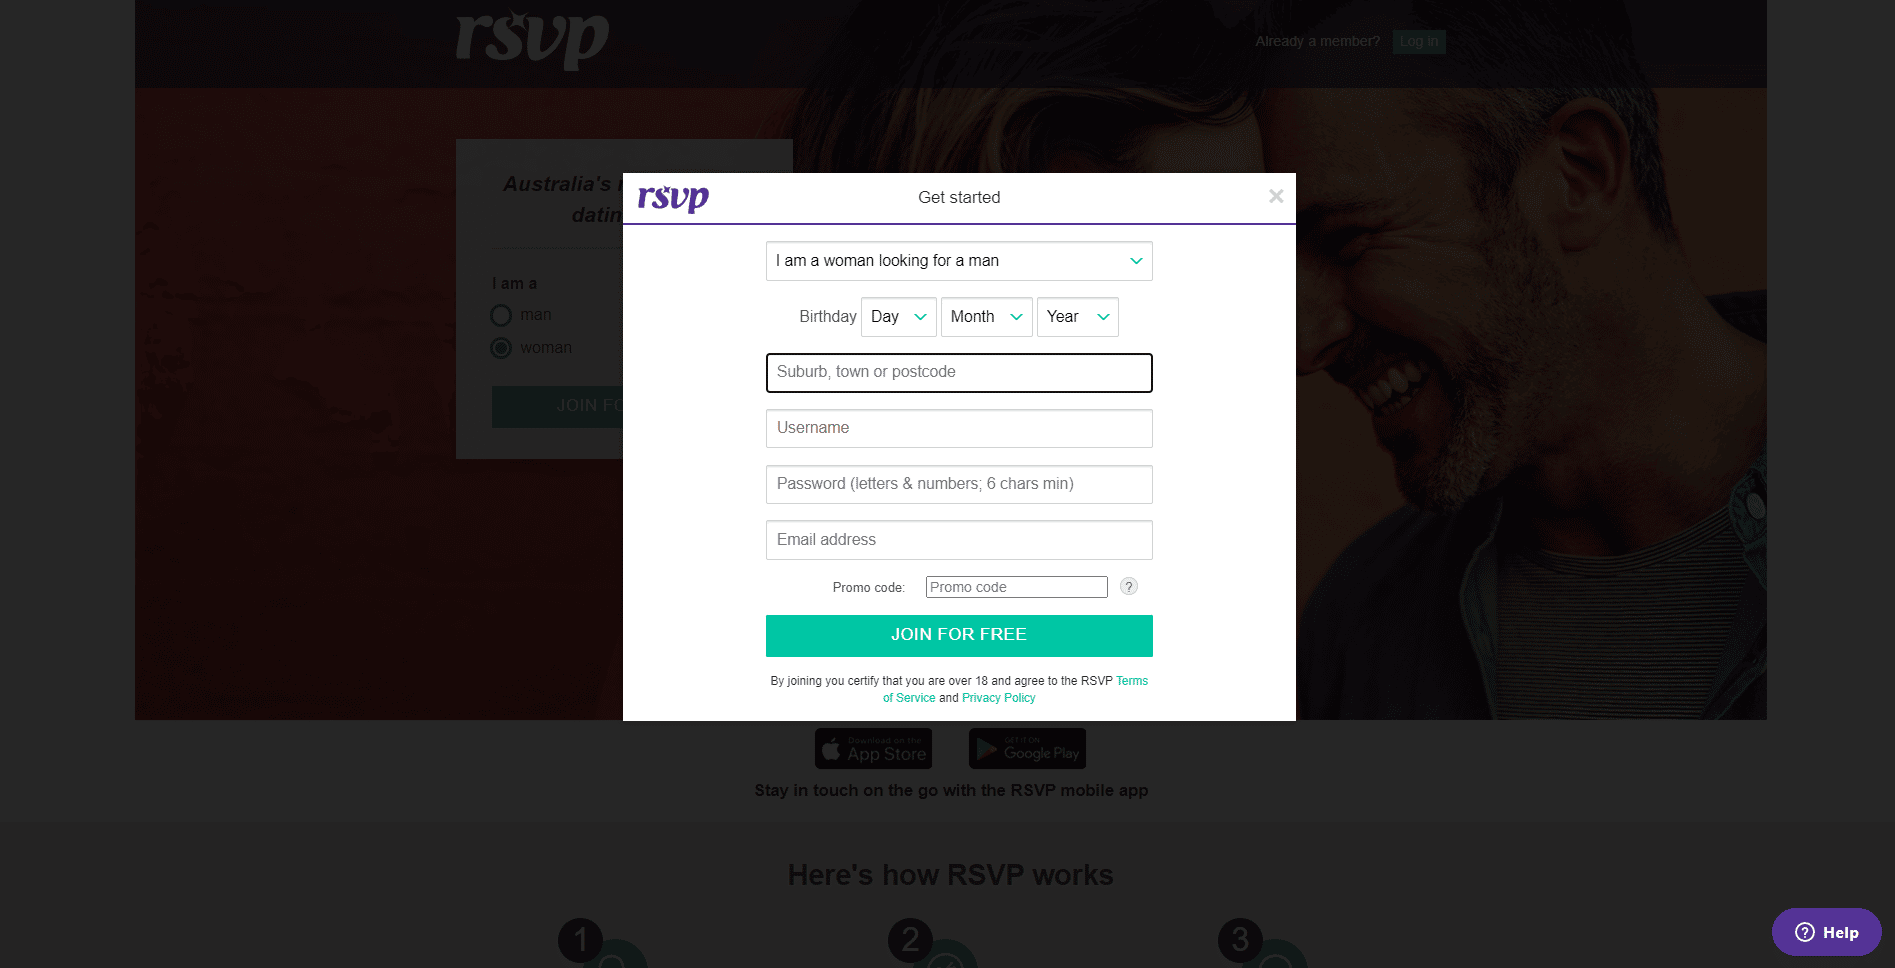 RSVP Cost and Login